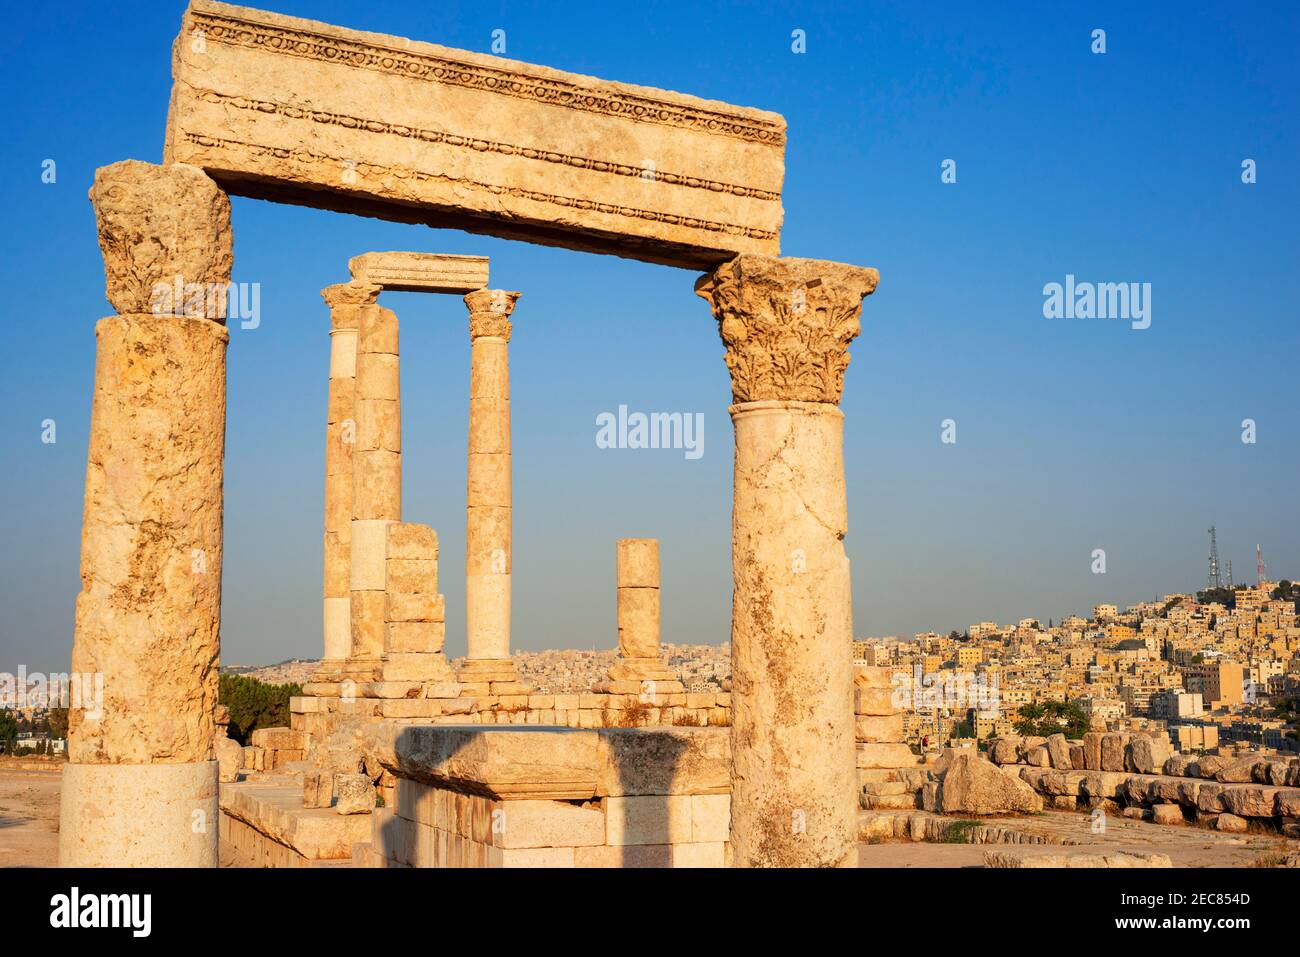 Remains of the Temple of Hercules on the Citadel, Jordan. The ancient Roman Stock Photo Alamy